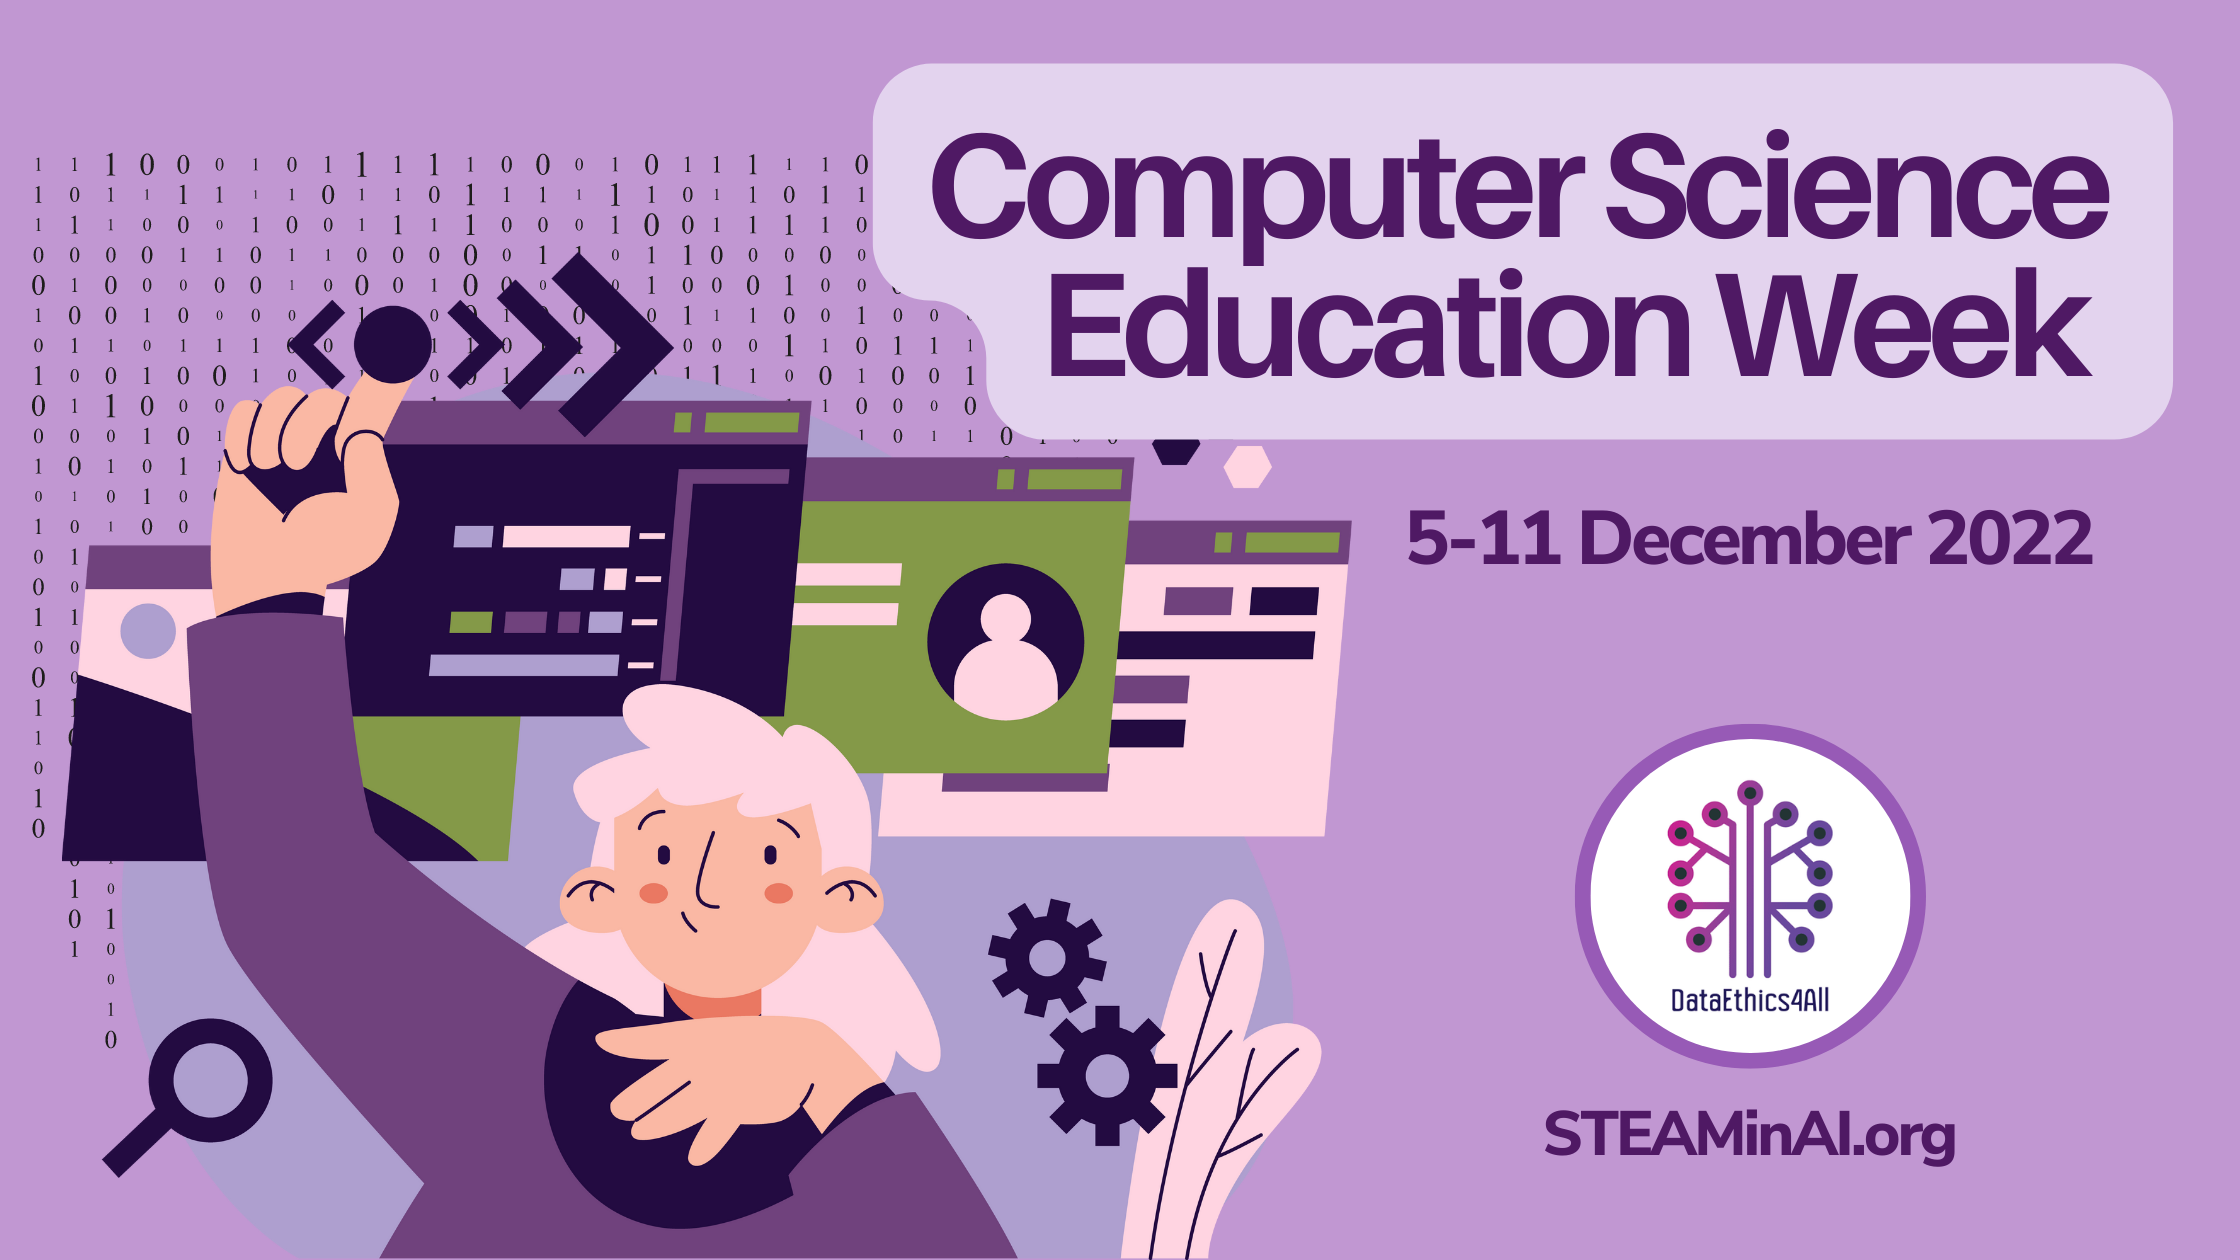 STEAM in AI Computer Science Education Week